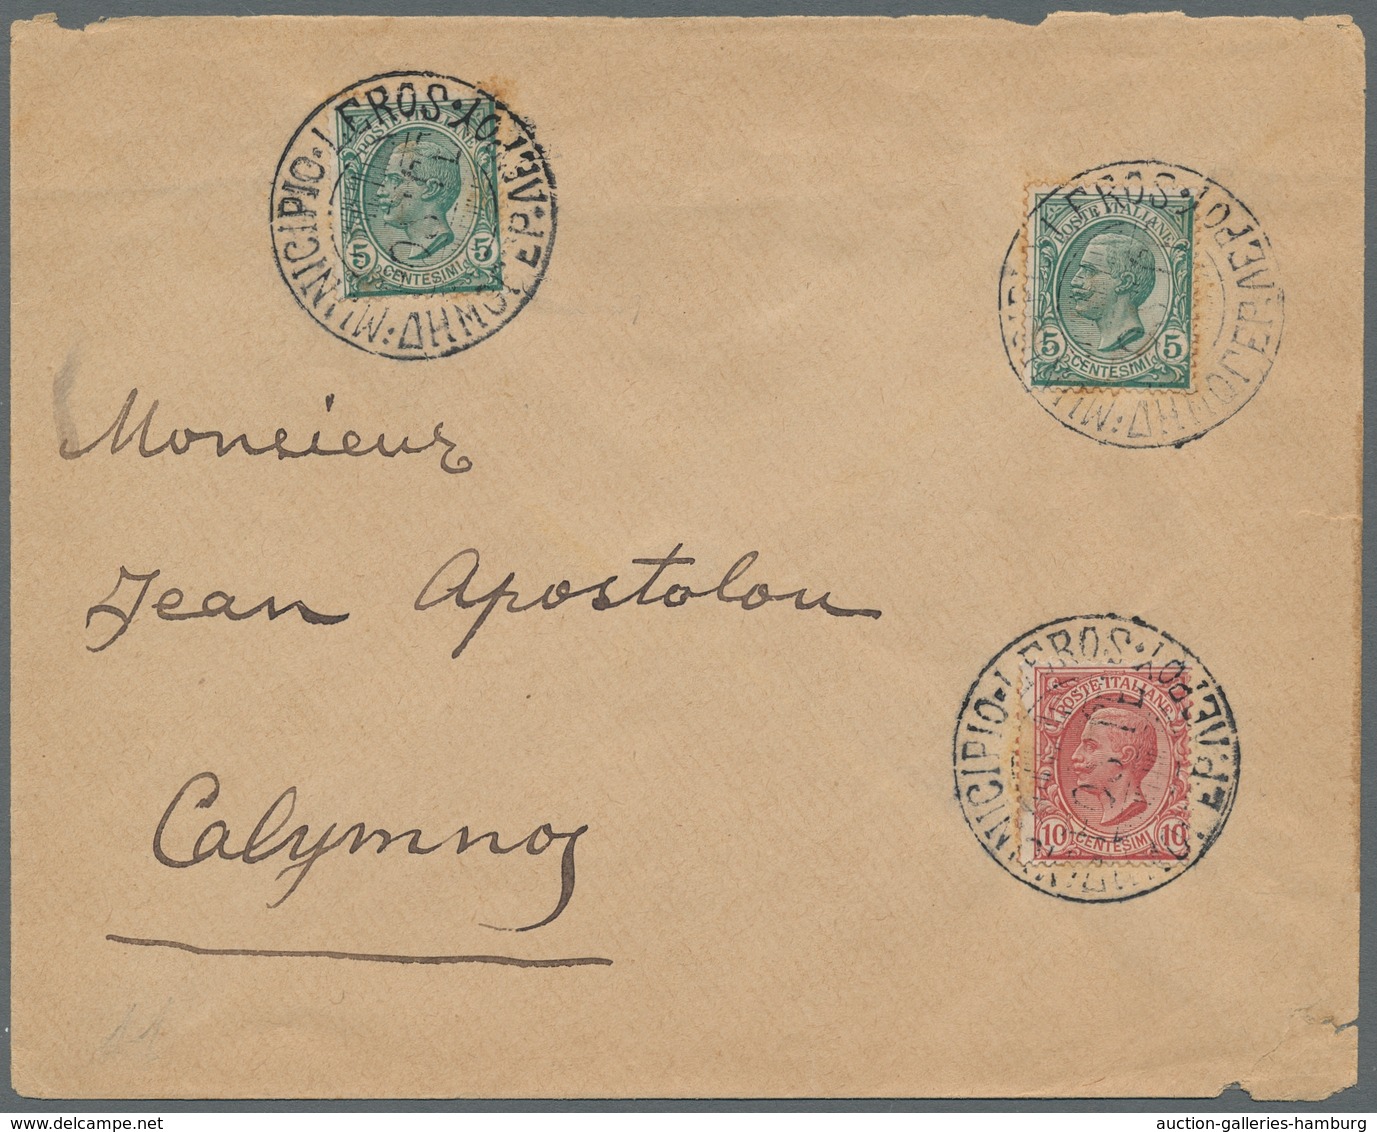 Ägäische Inseln: 1912, Italy Michel 88 (2) And 89 As Mixed Franking On Cover With Bilingual MUNCIPIO - Egée